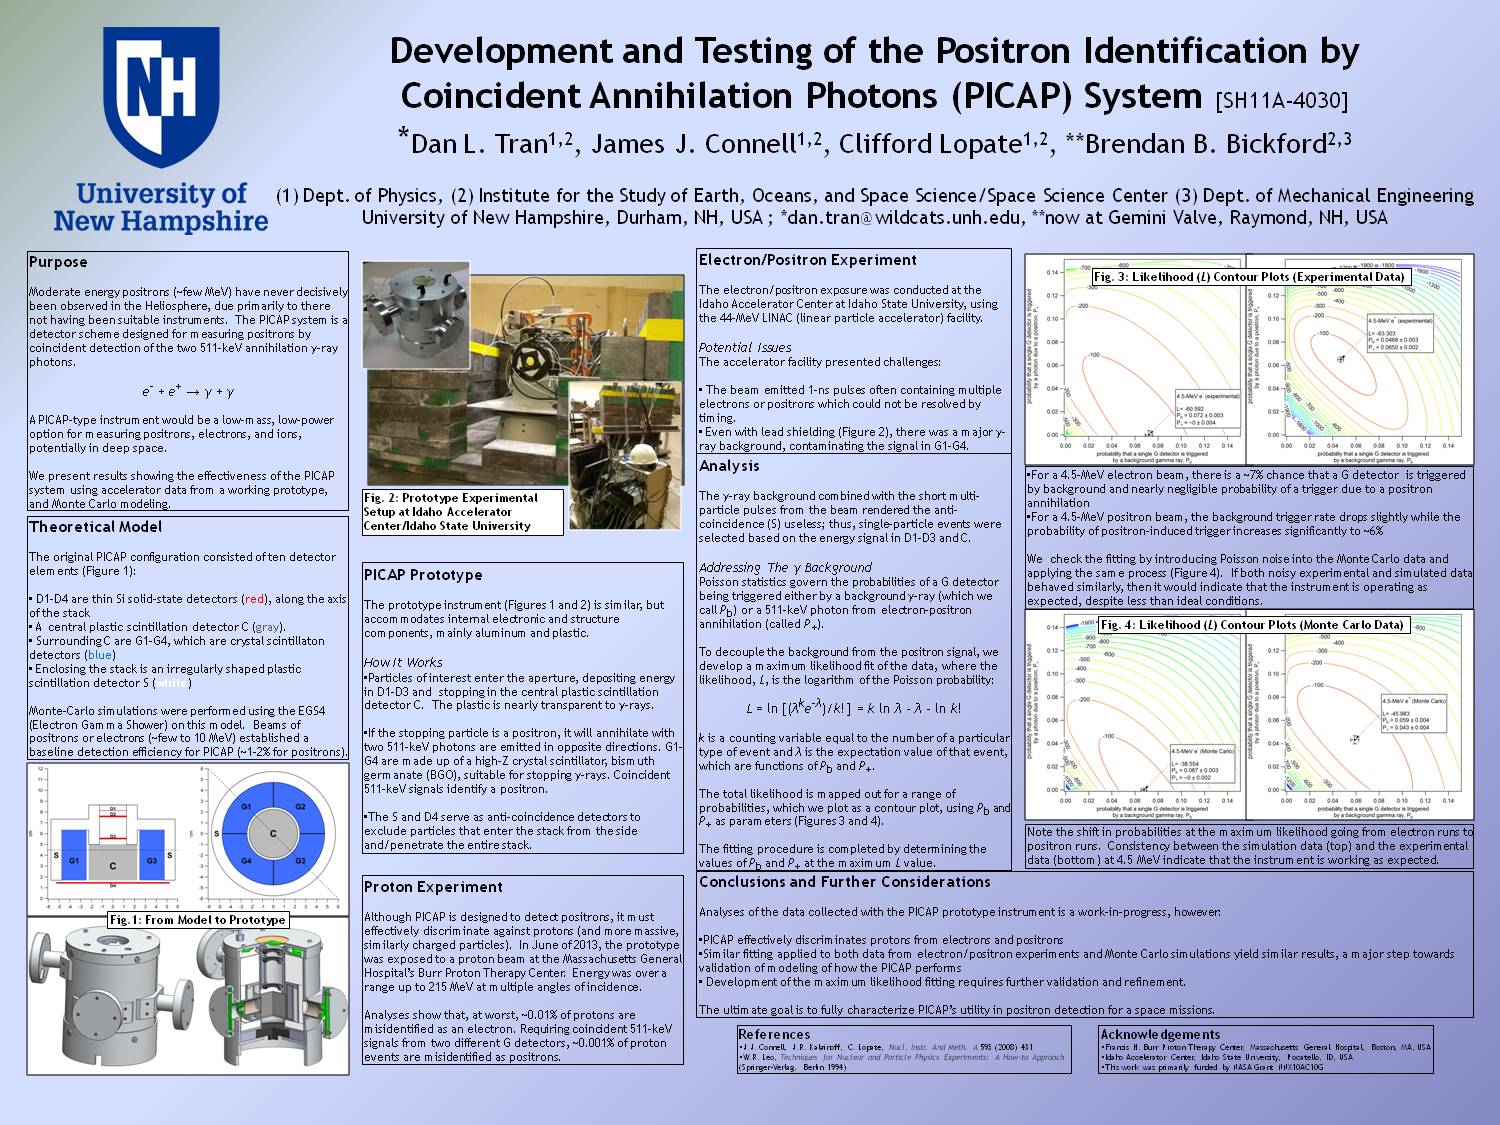 Development And Testing Of The Positron Identification By Coincident Annihilation Photons (Picap) System by dlr38